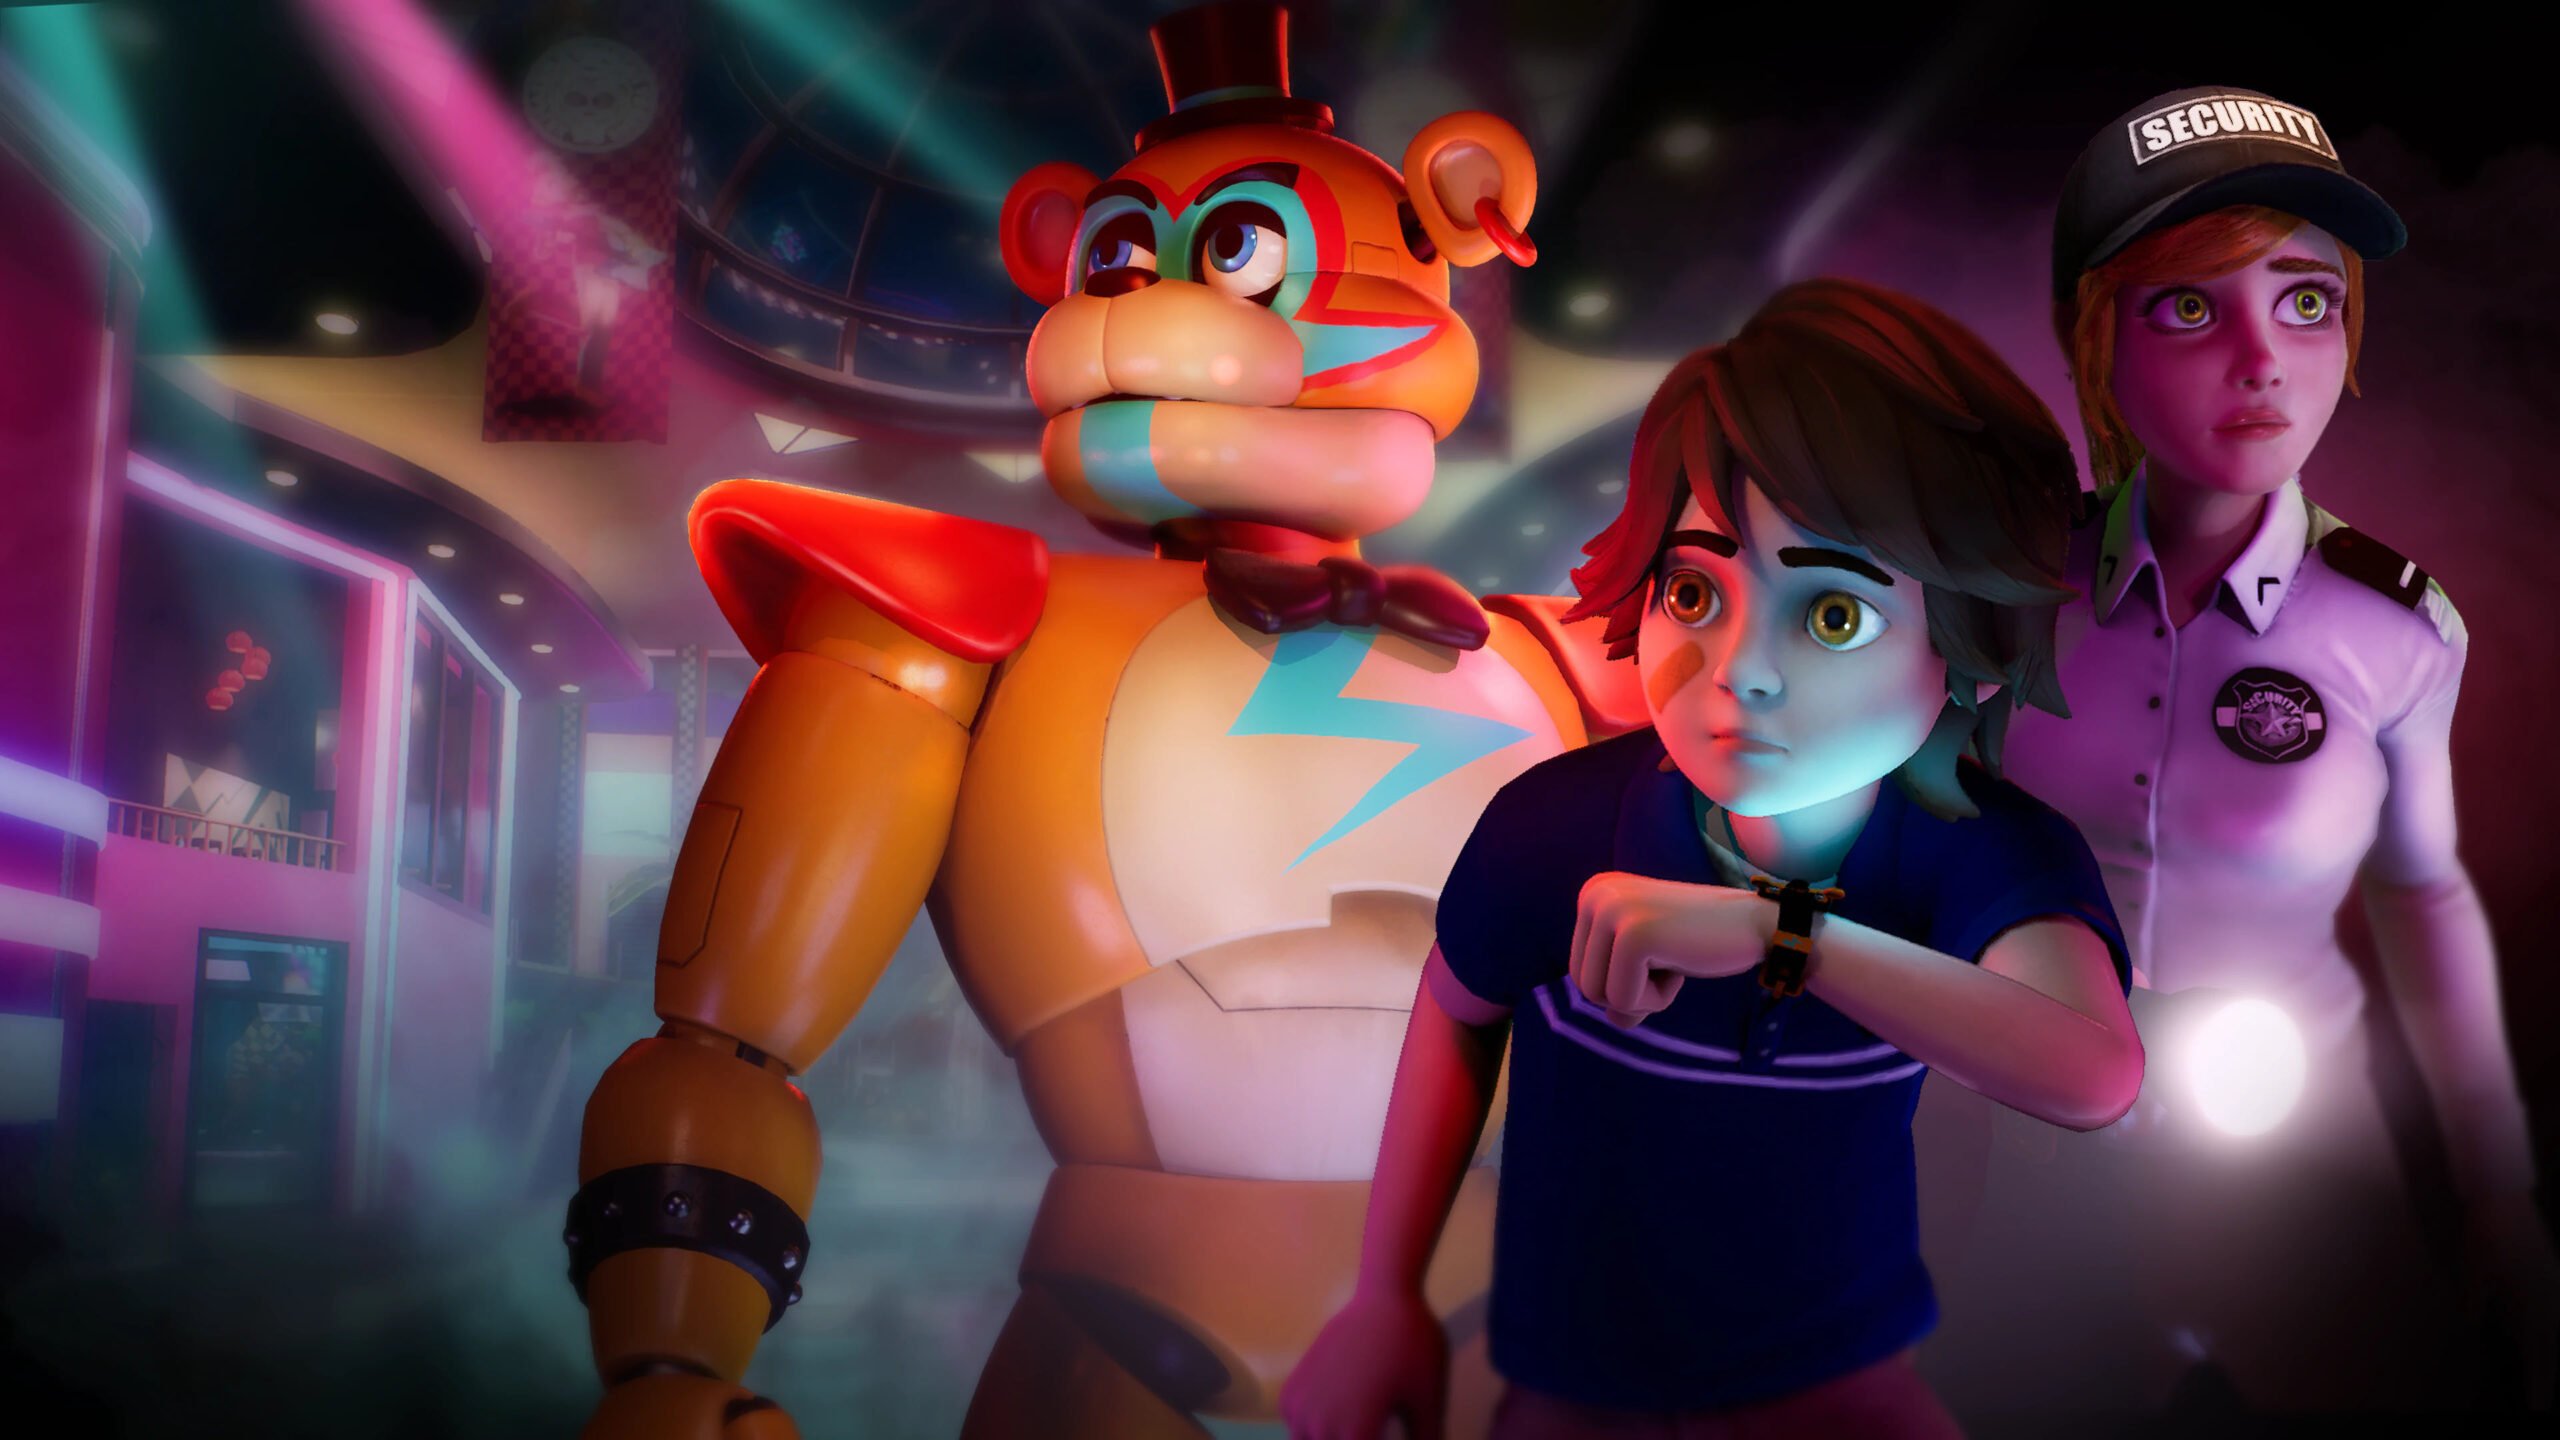 Five Nights at Freddy's: Security Breach coming soon Physically to